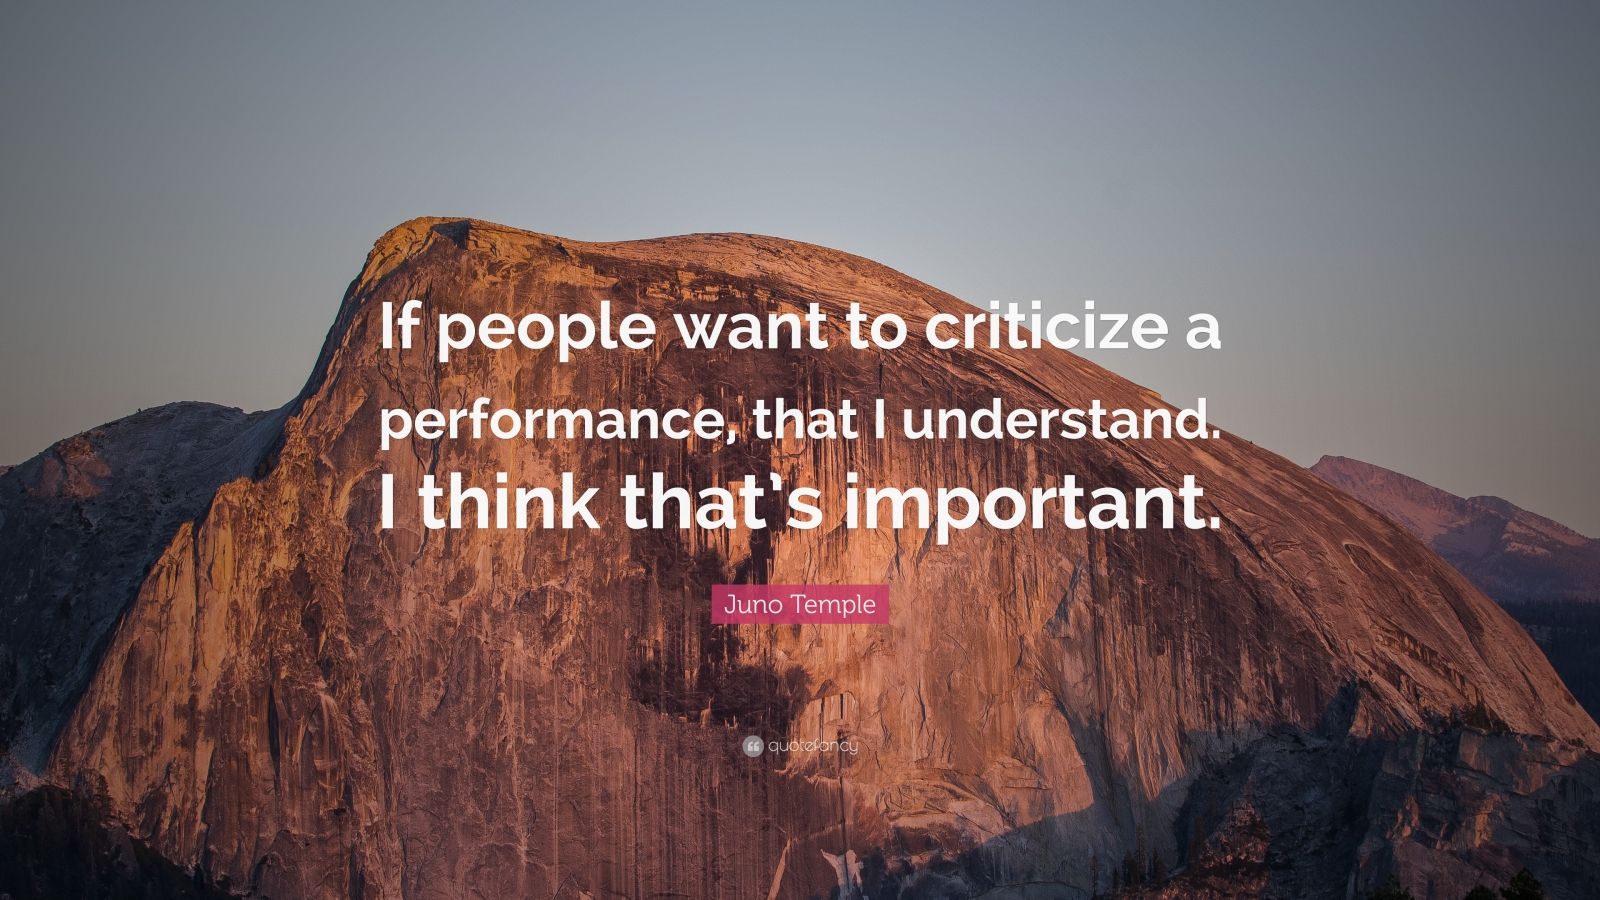 Juno Temple Quote: "If people want to criticize a performance, that I understand. I think that's ...